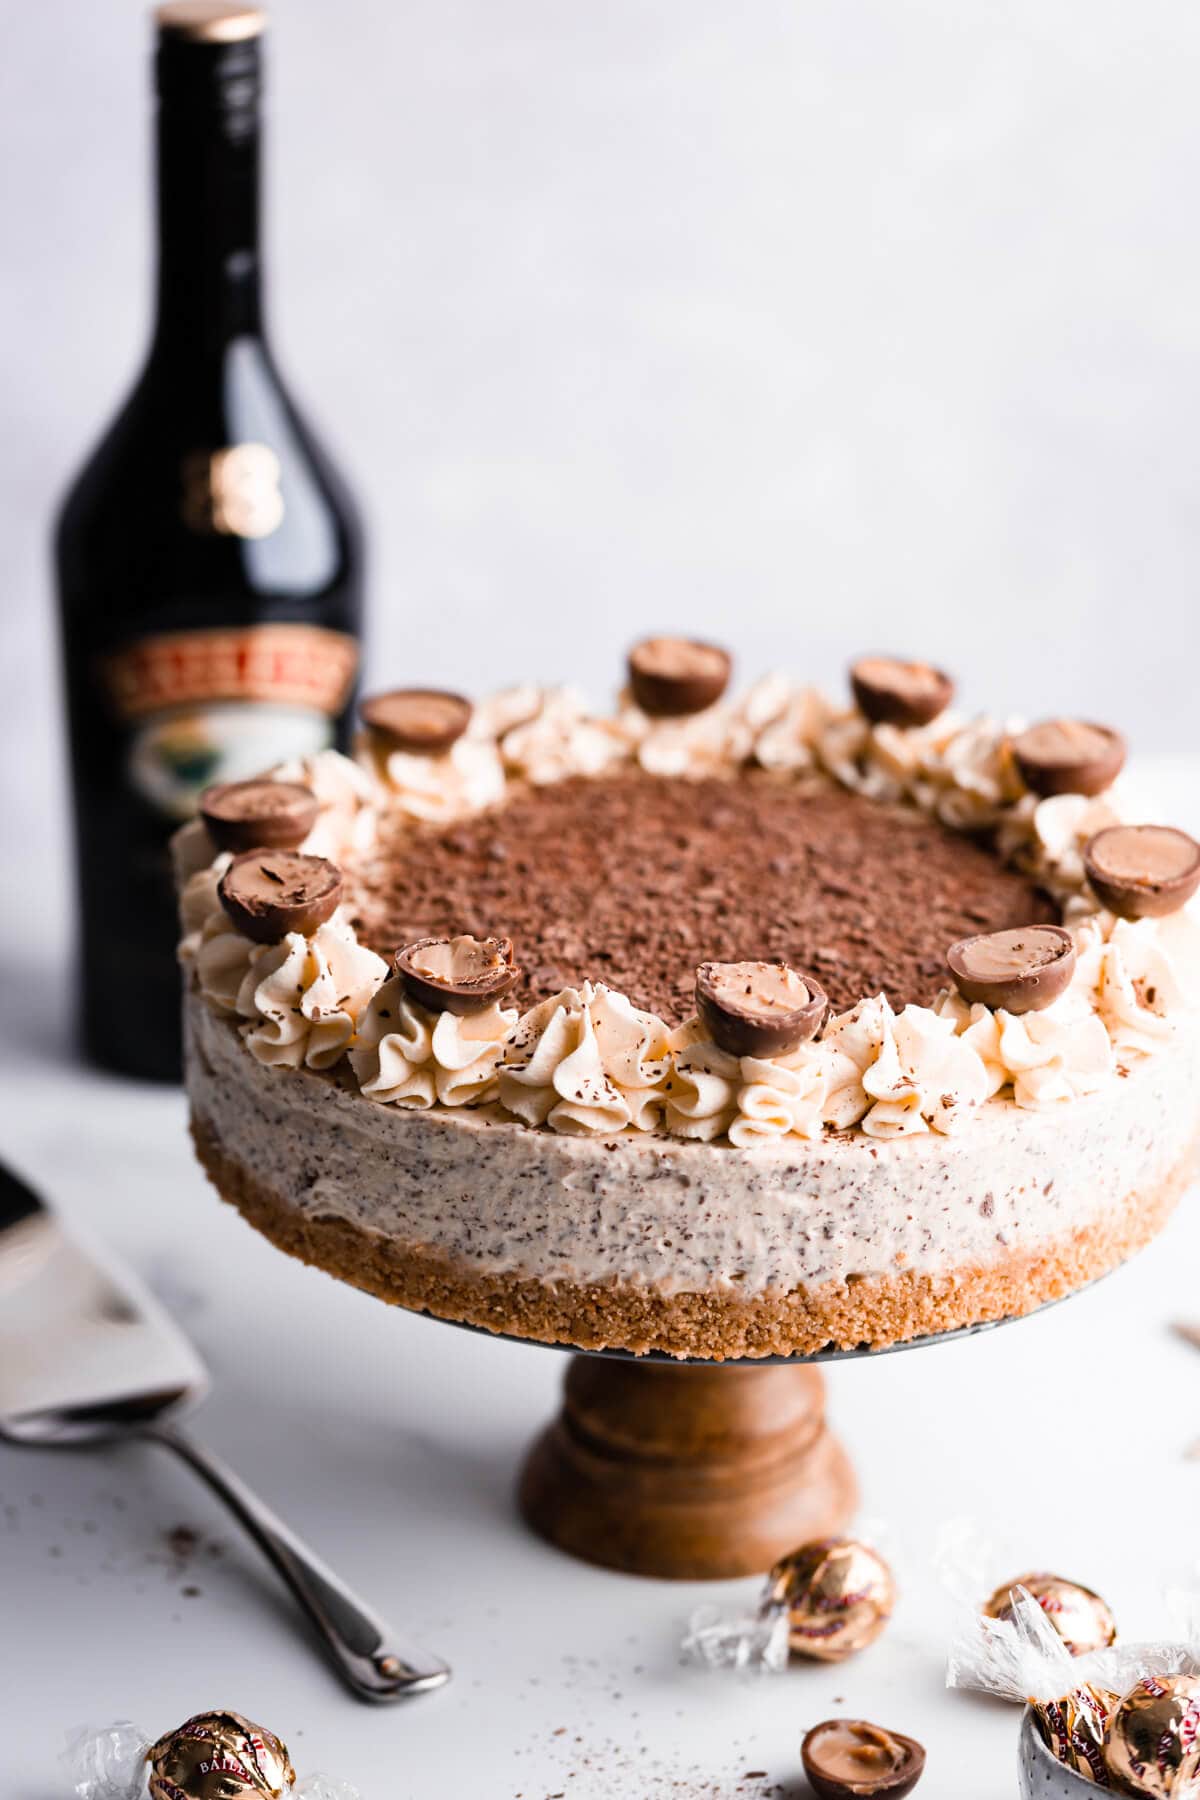 45 degree angle view of the Baileys cheesecake on a cake stand